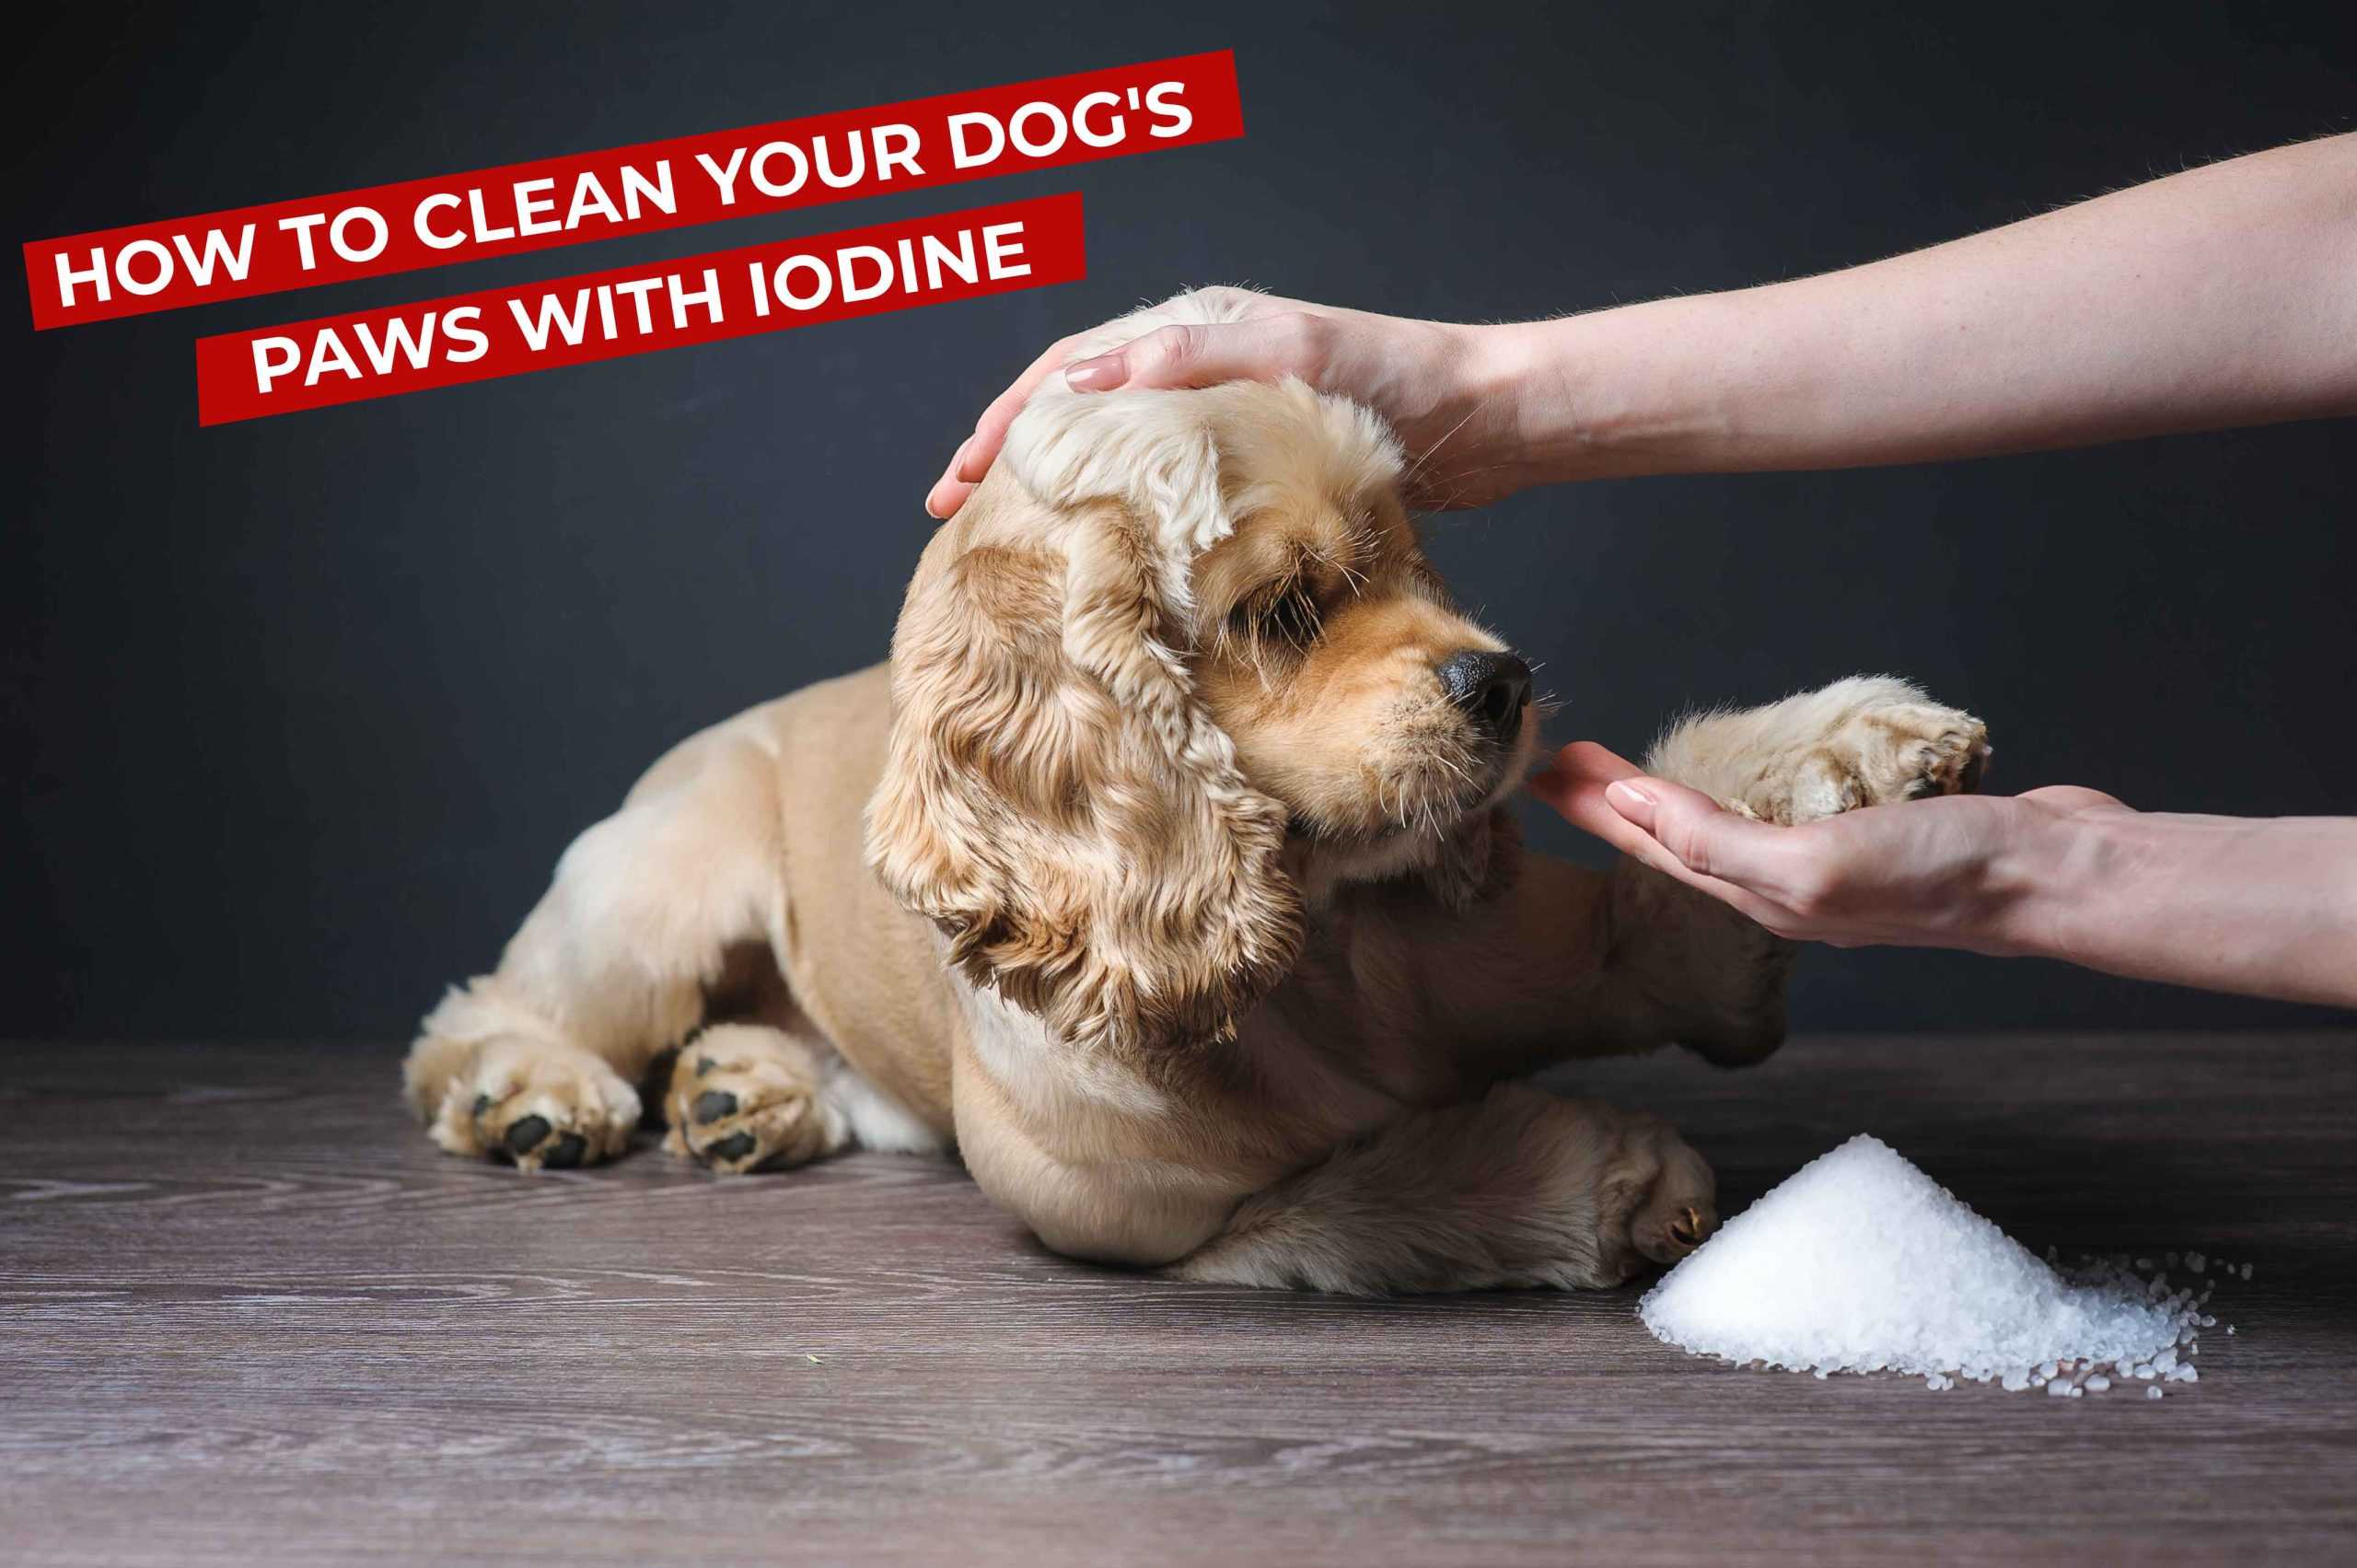 How to Clean Your Dog's Paws with Iodine: Step-by-Step Guide